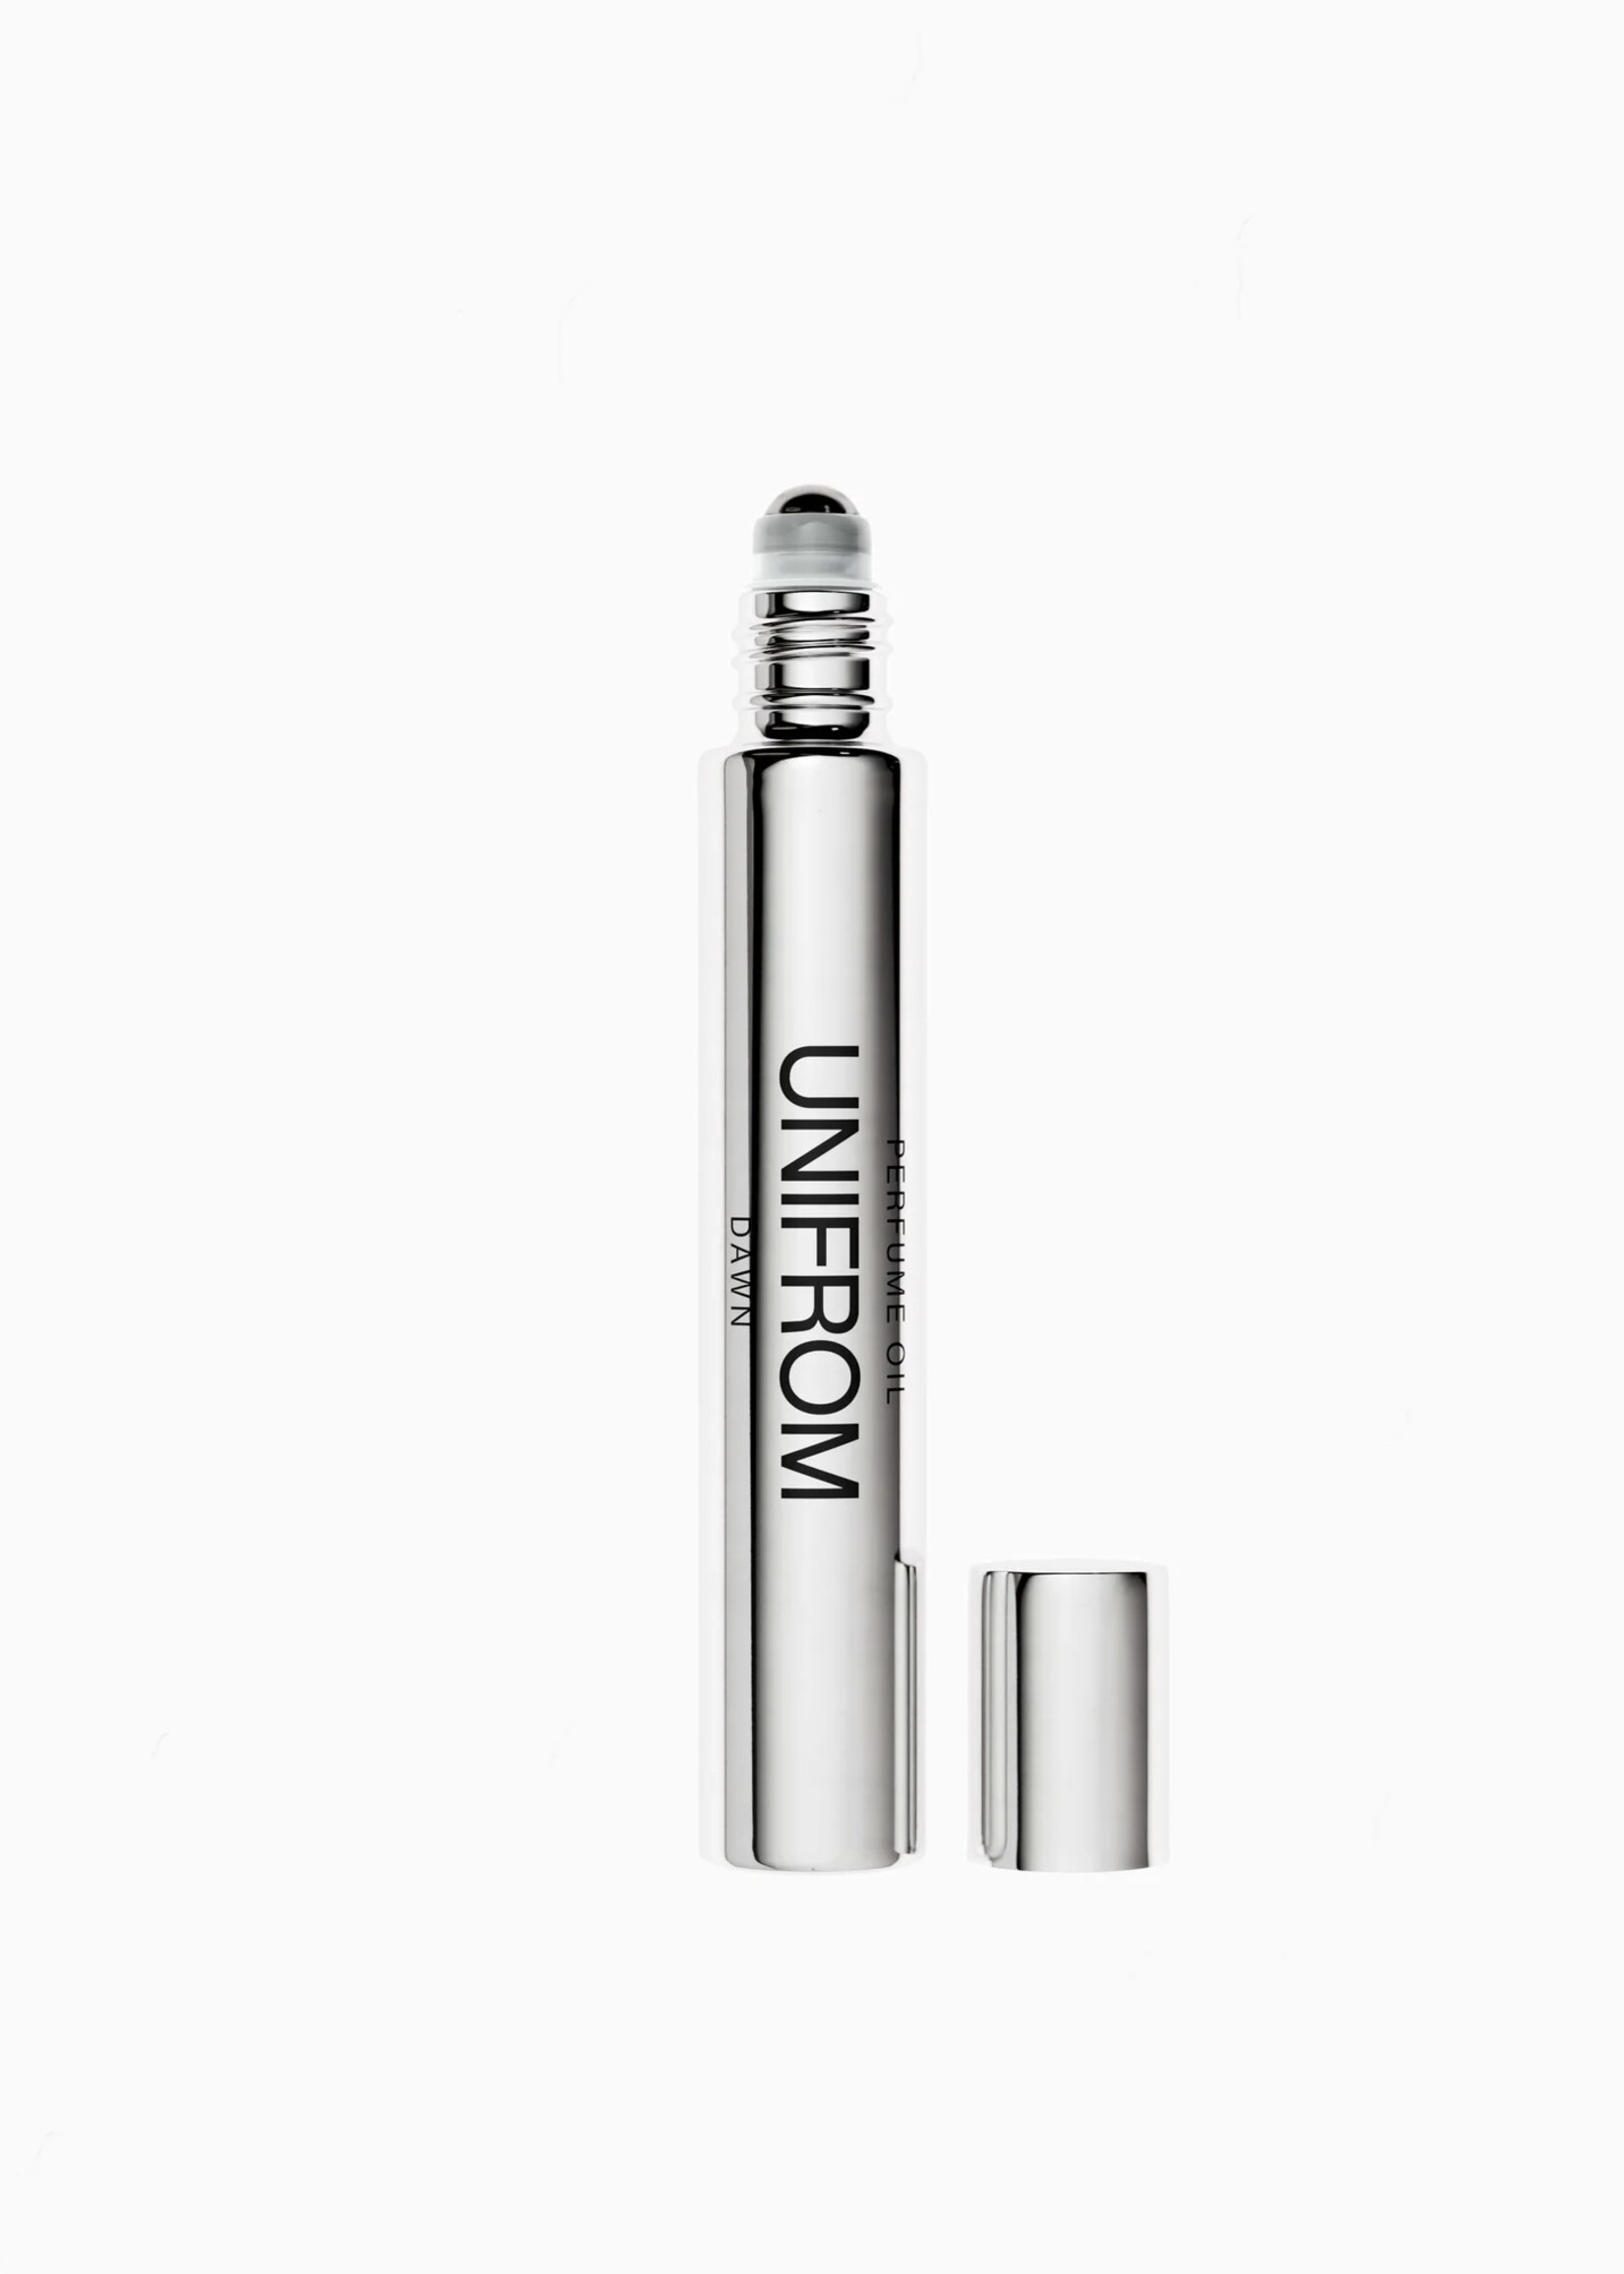 UNIFROM DAWN Roll-on Perfume Oil 10ml